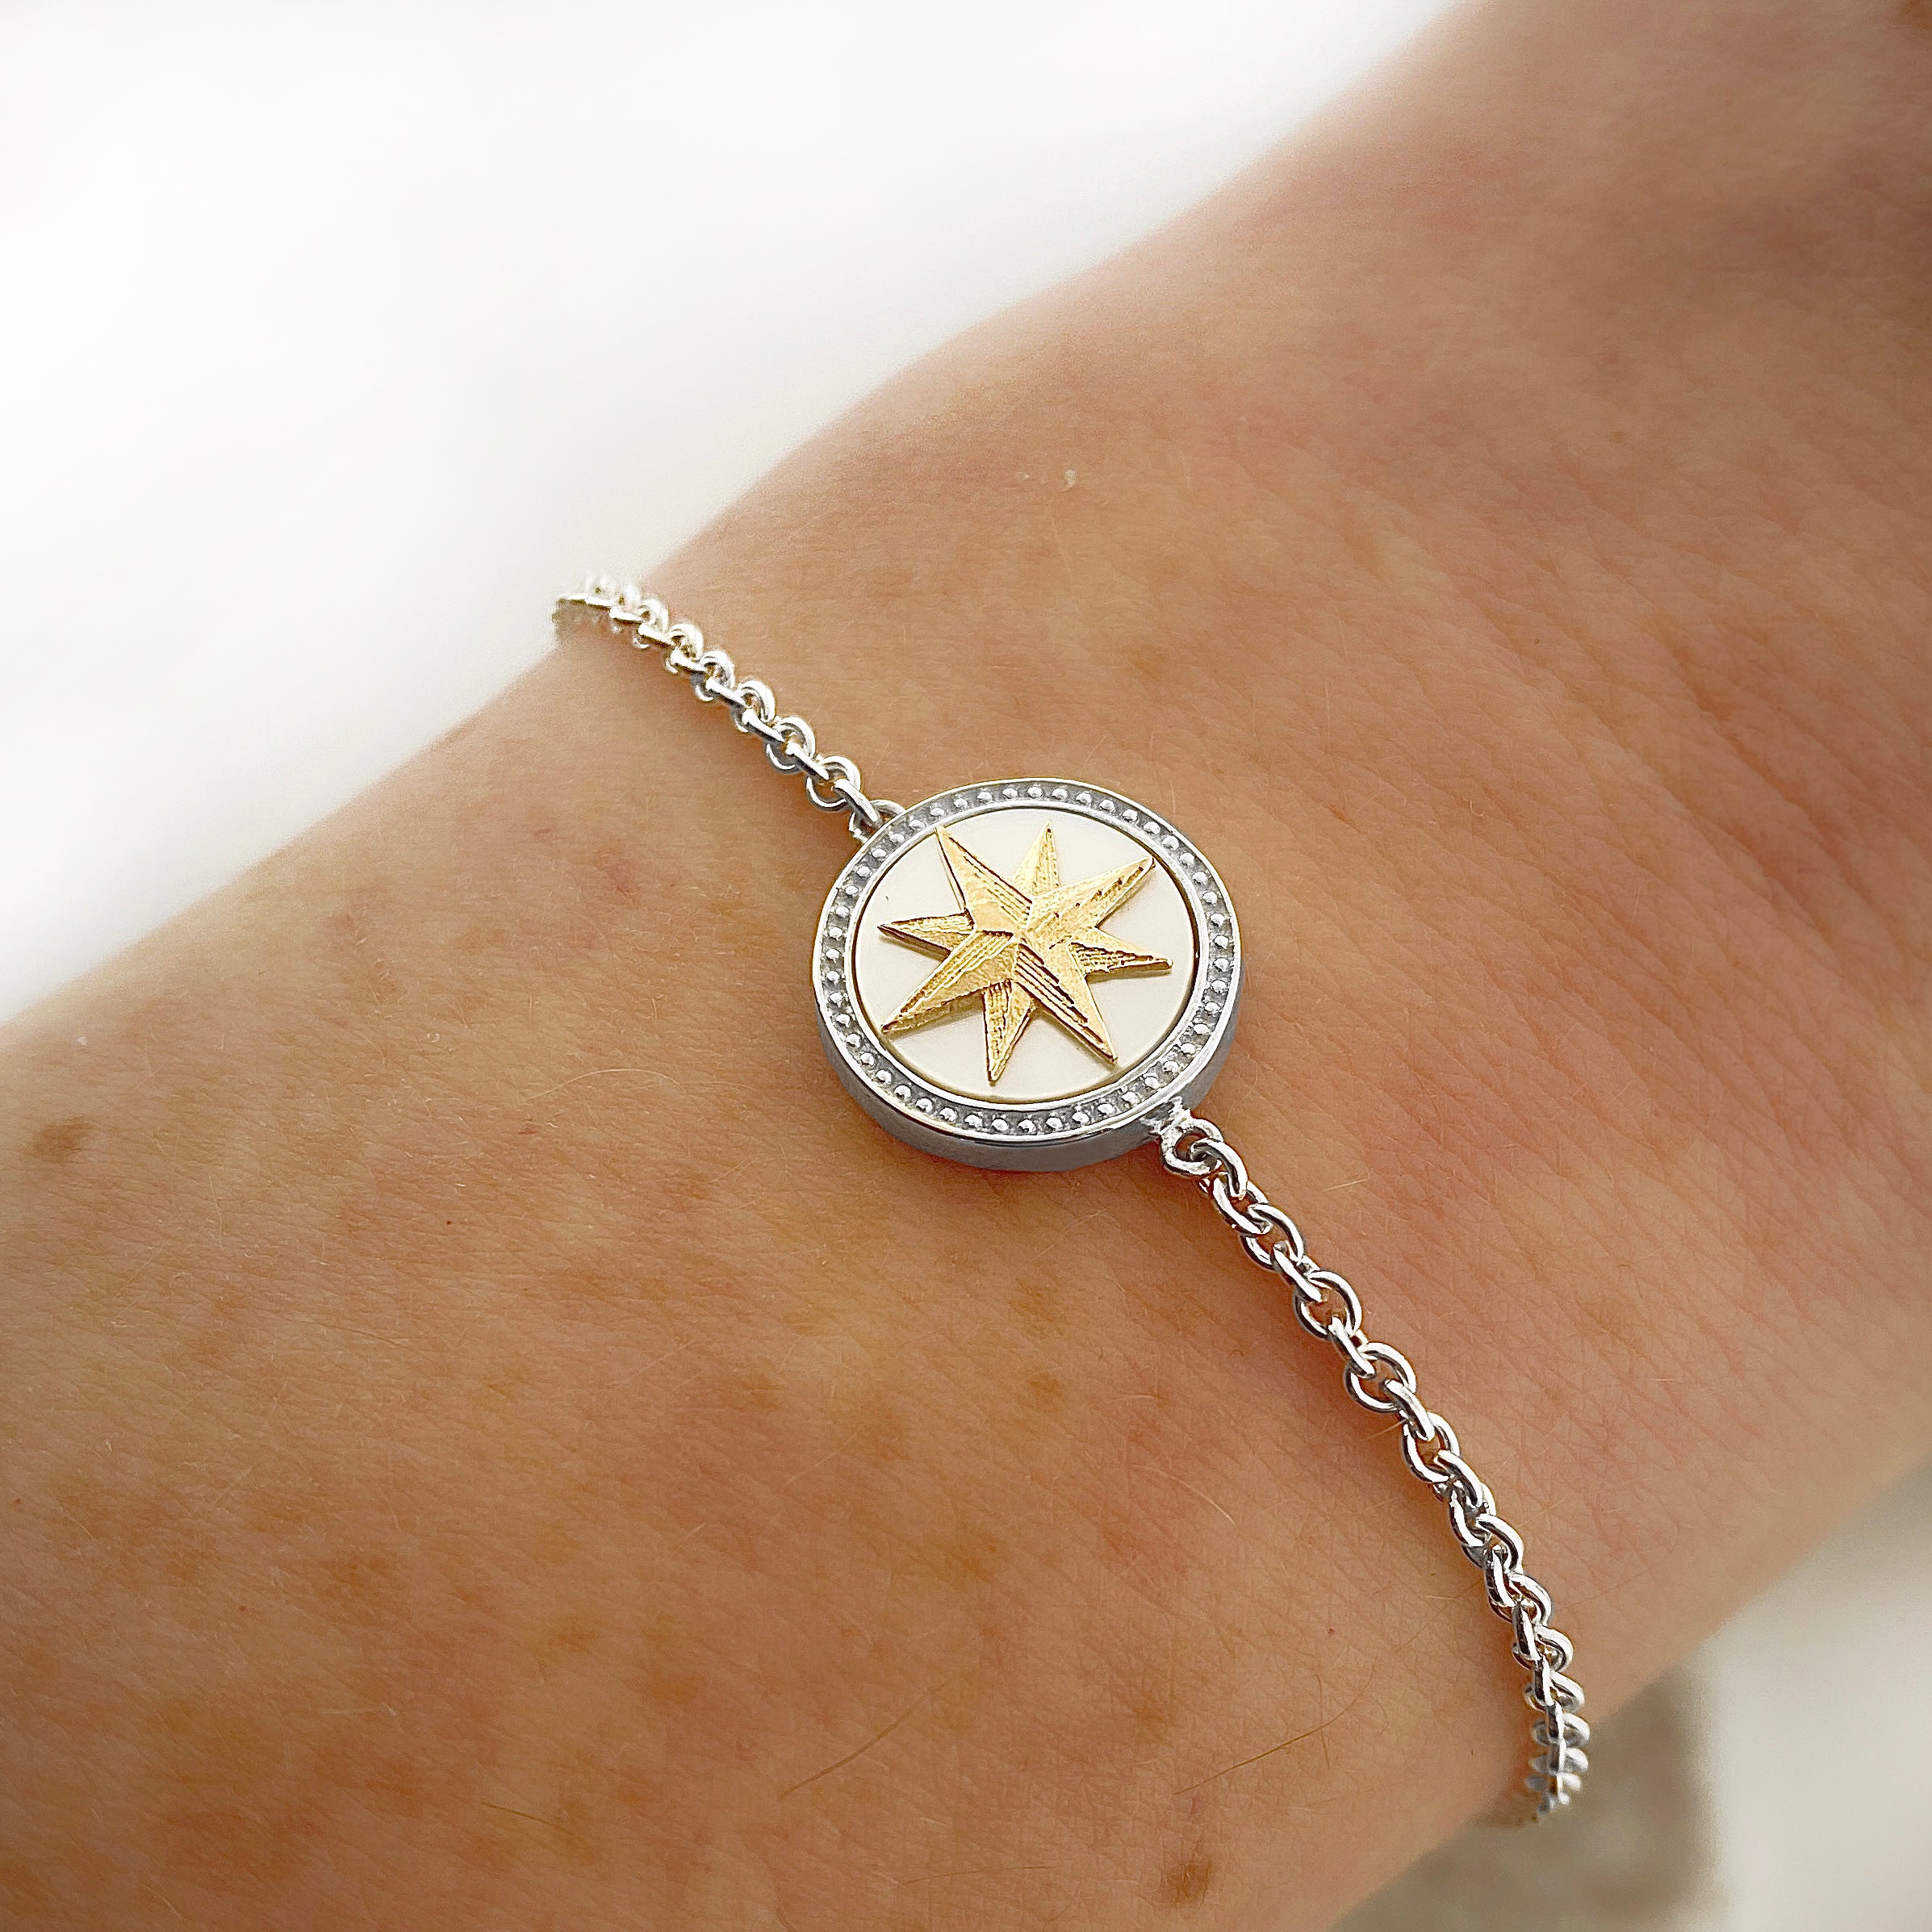 XOXO Tile Bracelet in Gold or Silver by Marlyn Schiff – The Perfect  Provenance